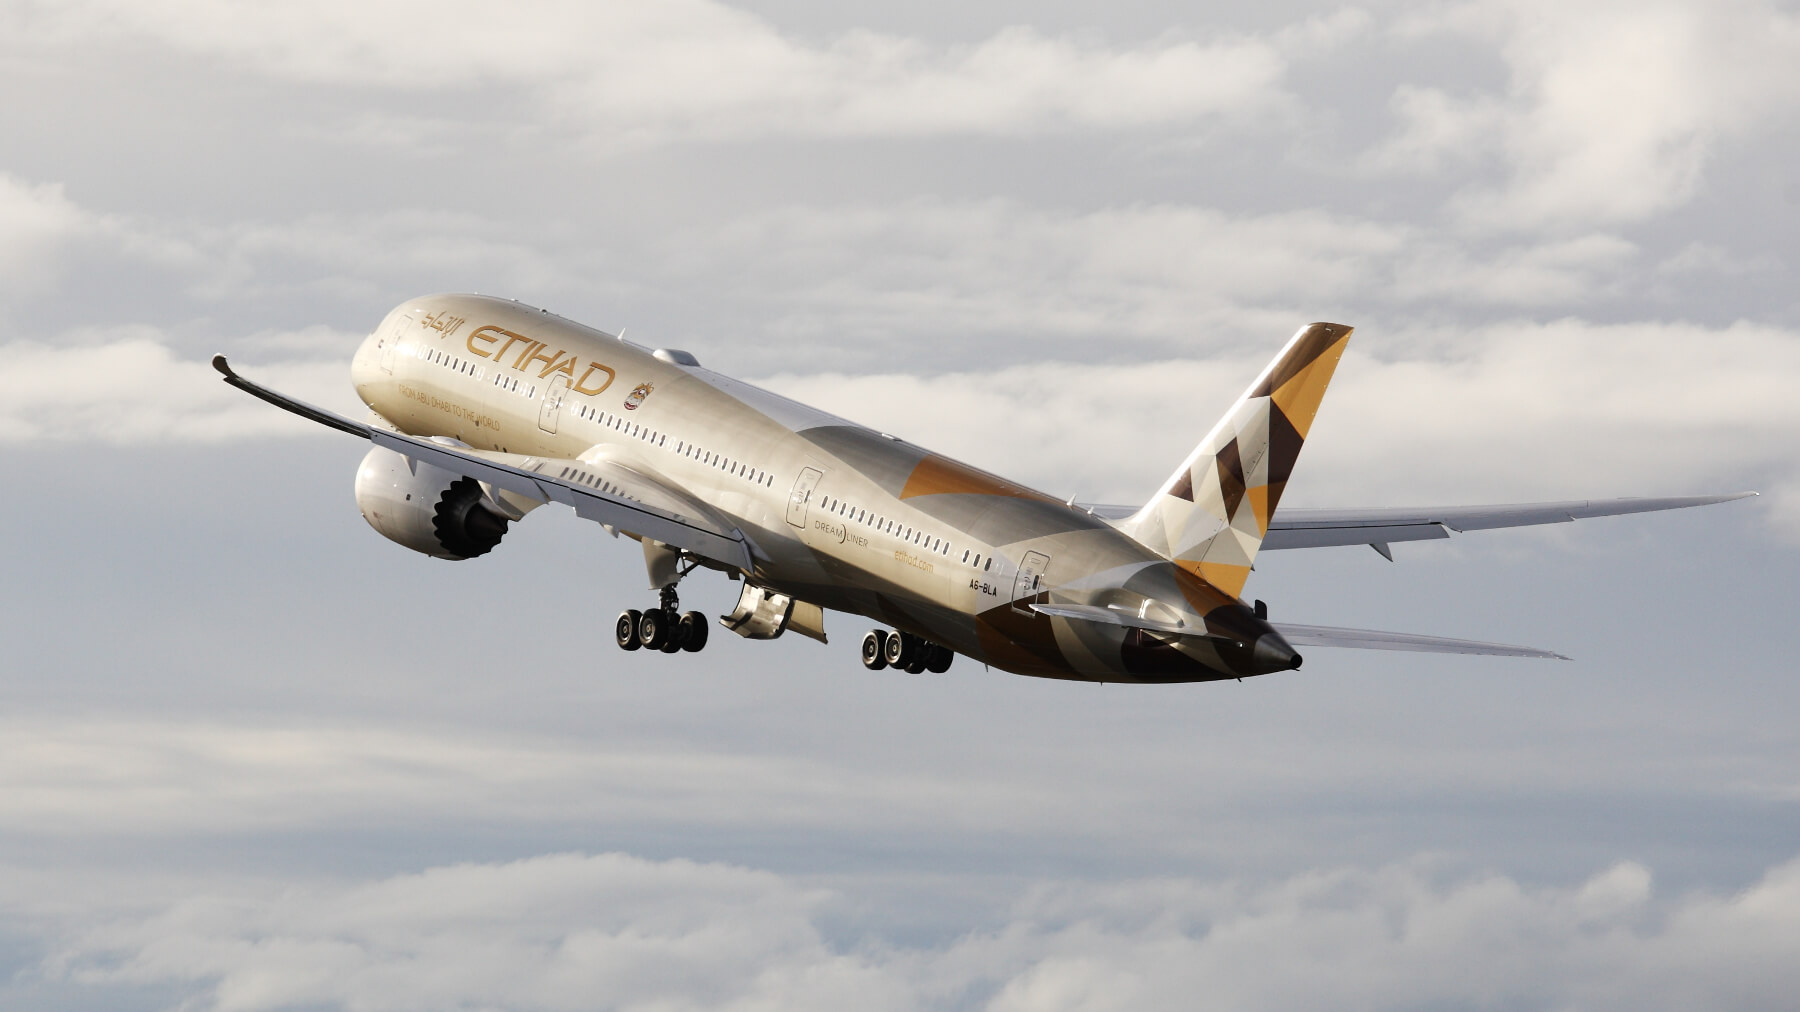 Goshawk delivers fourth of four Boeing 787-9 aircraft to Etihad Airways